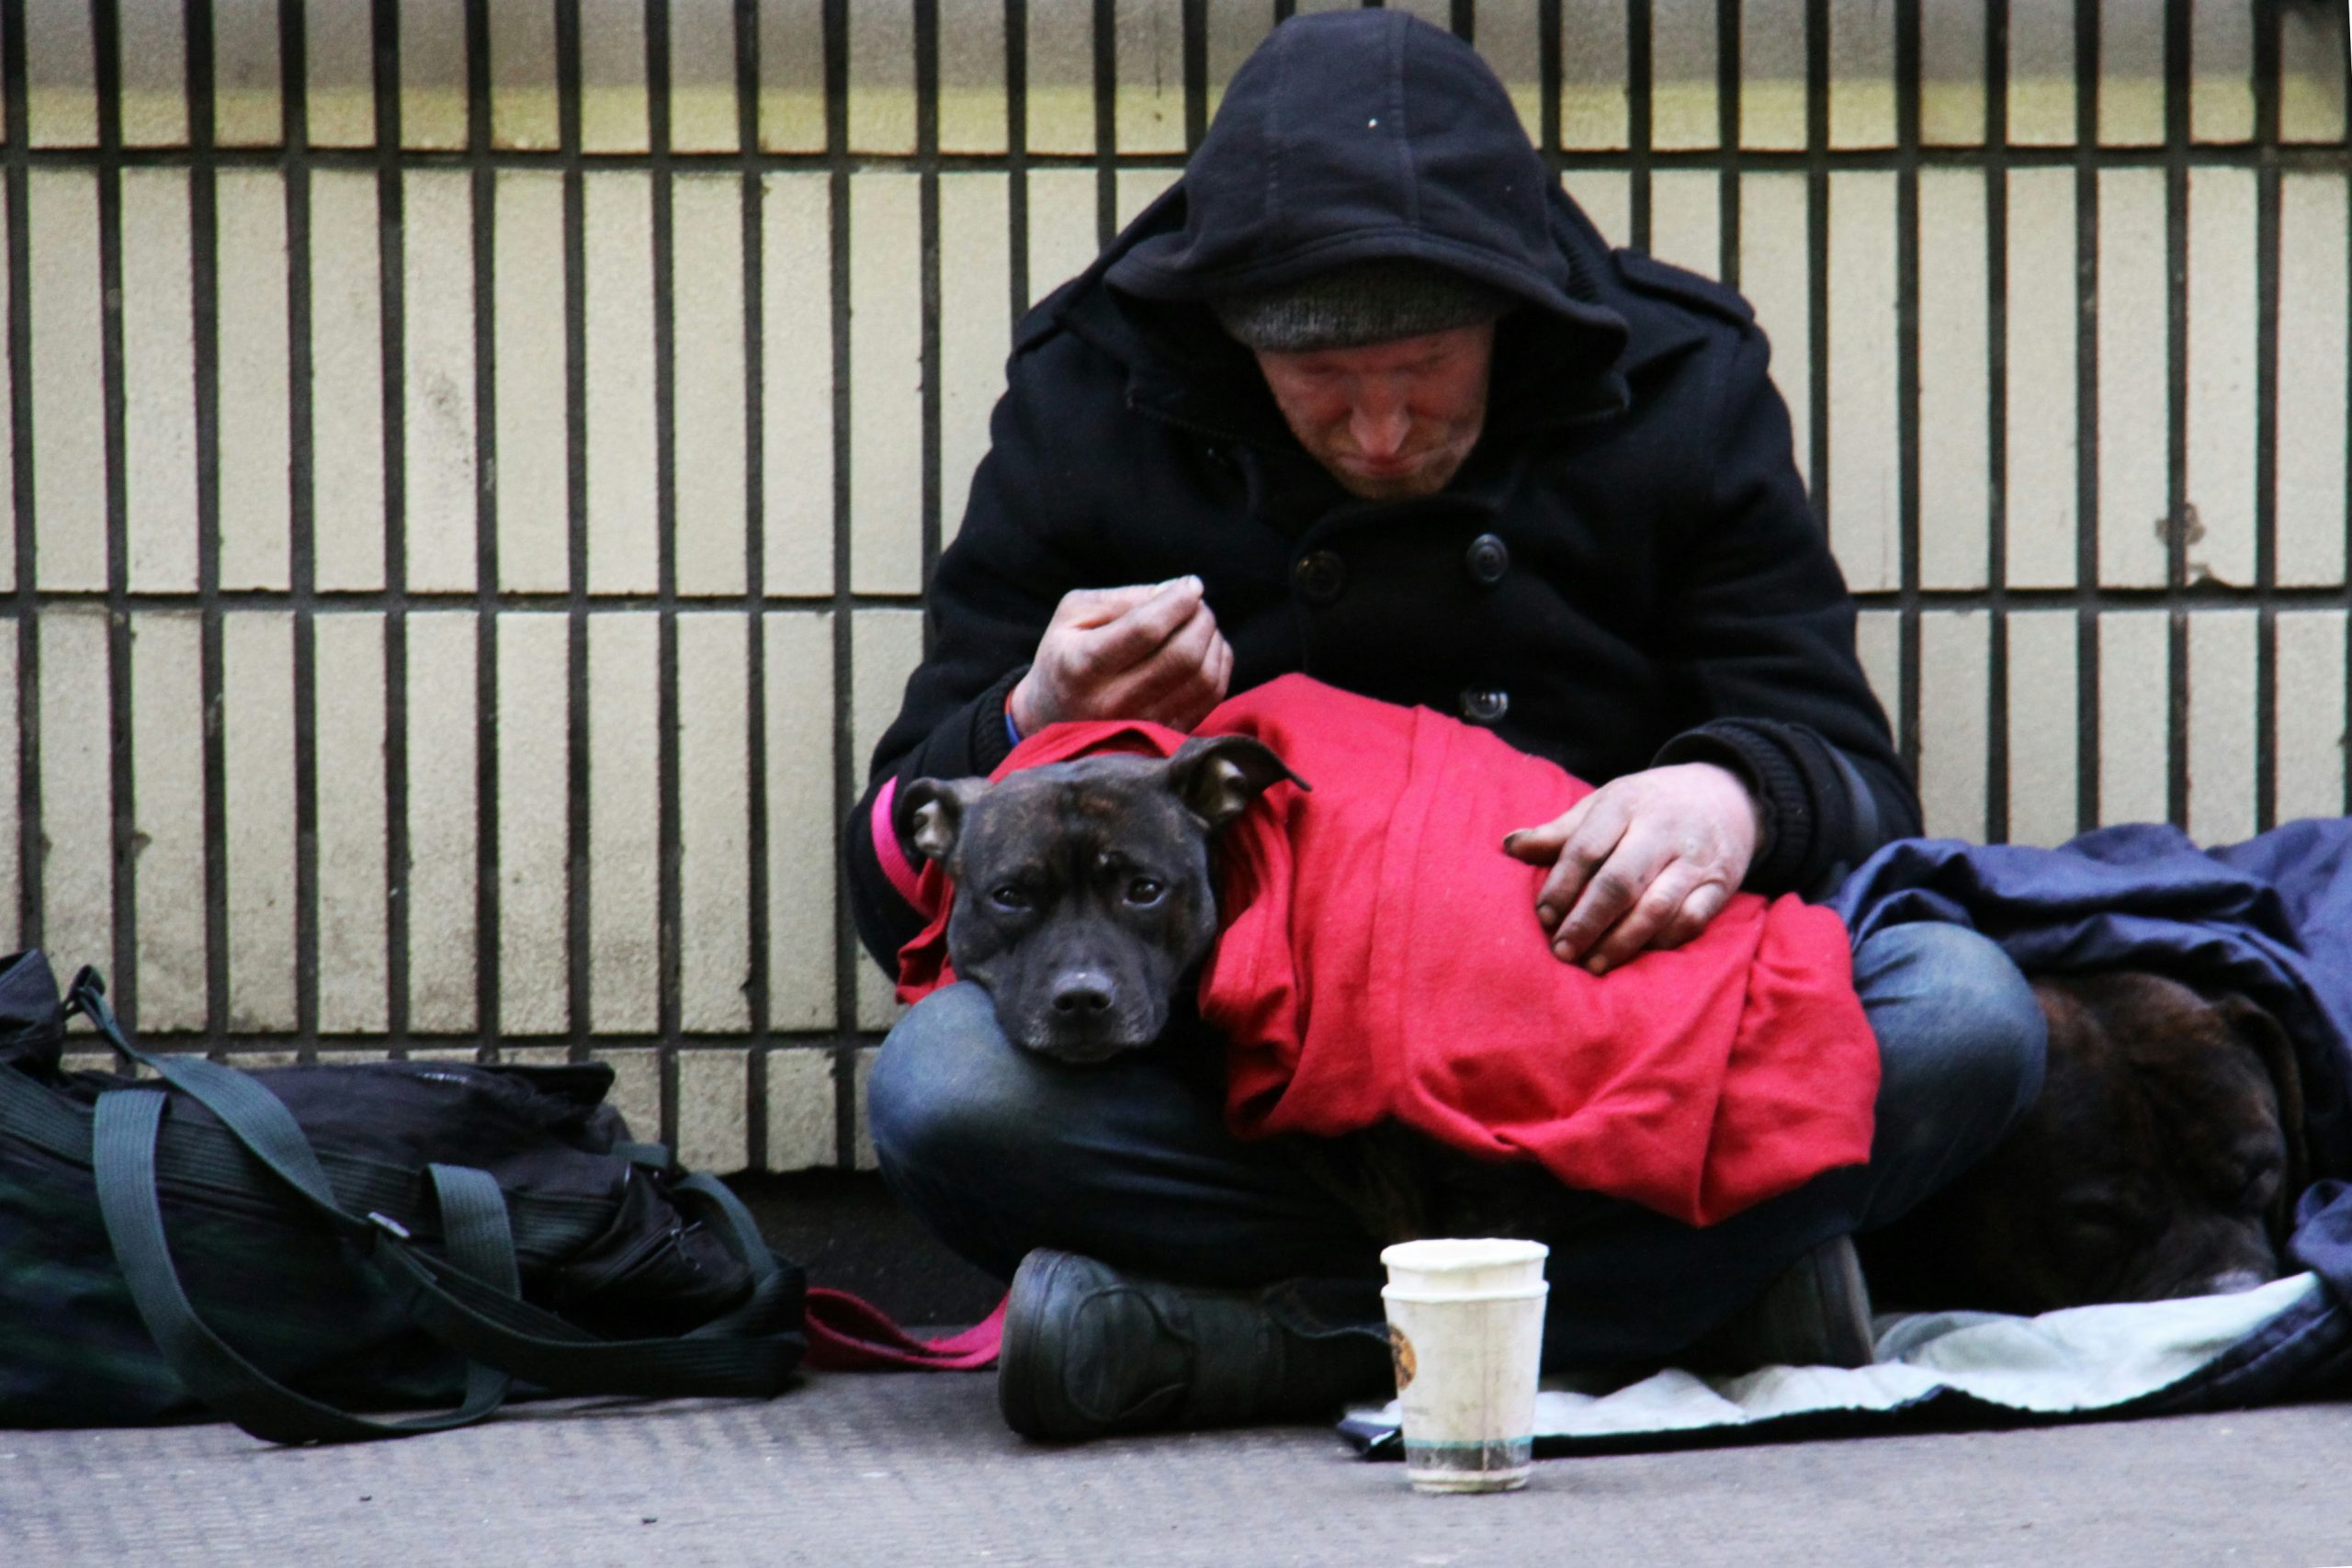 The “scandal” of homelessness among older people condemned